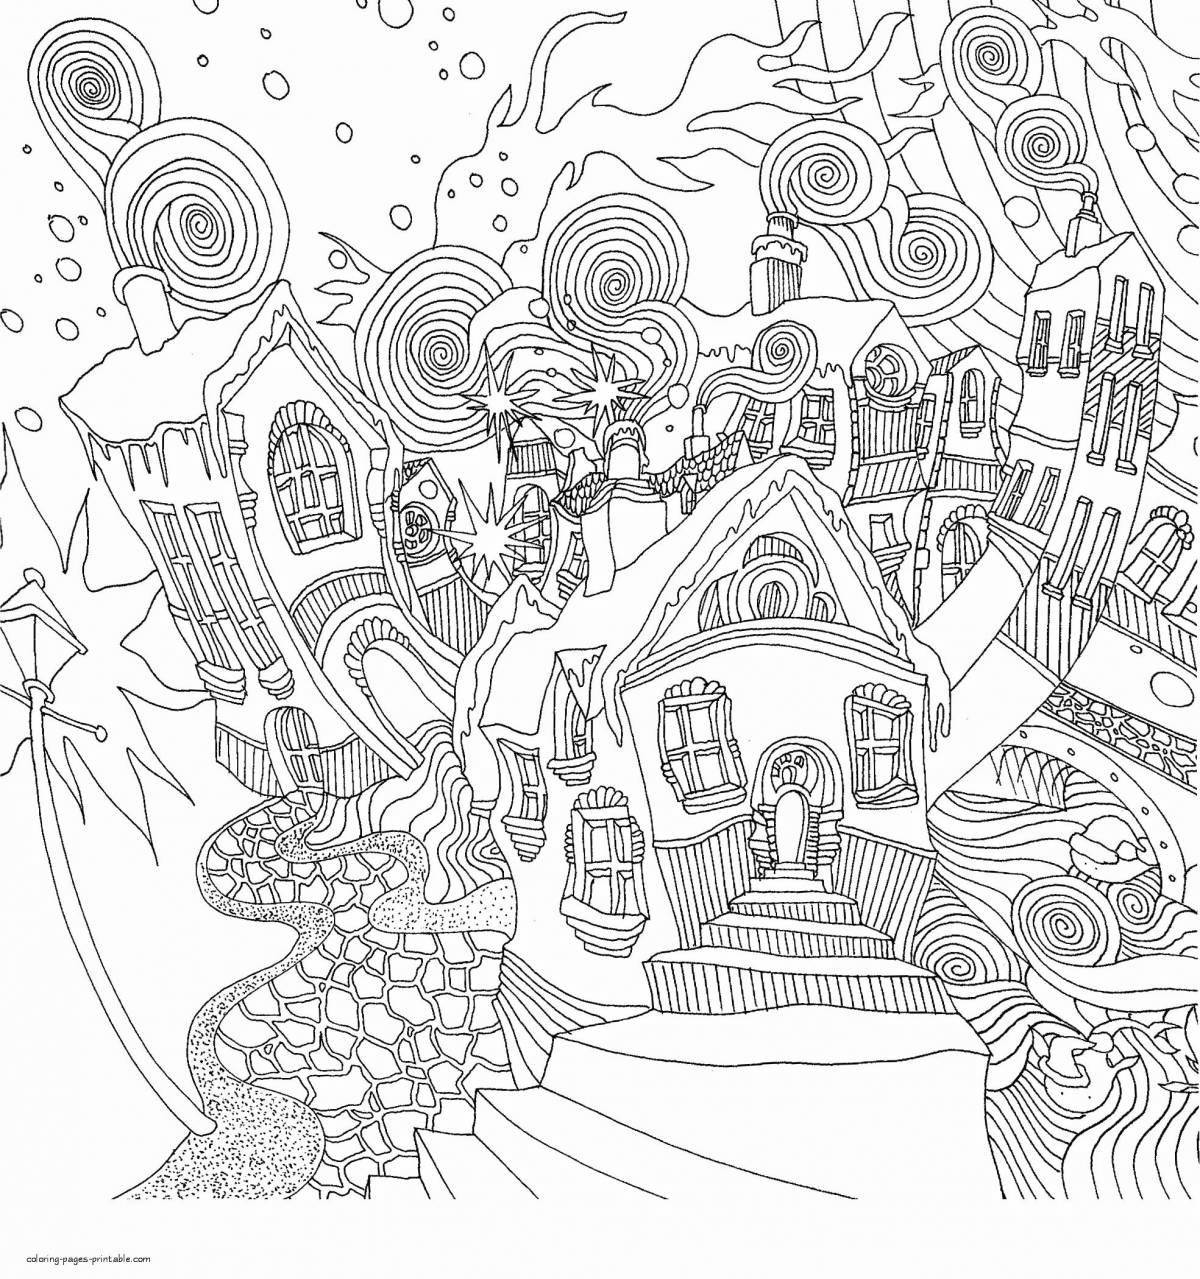 Refreshing meditation coloring book for adults